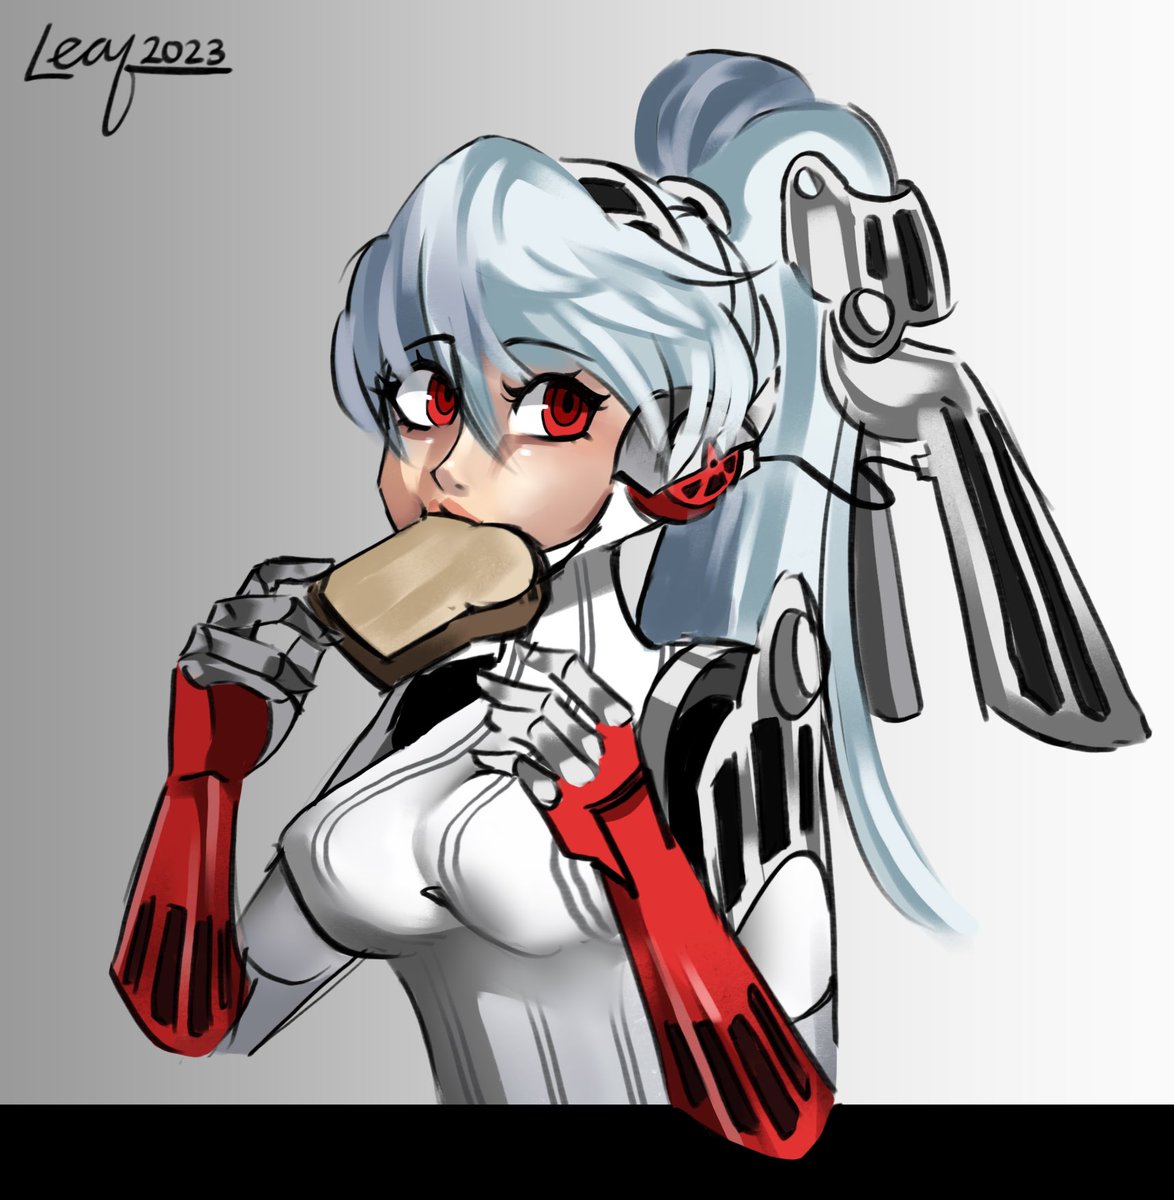 She’s not eating the bread she’s toasting it #labrys #persona4arenaultimax